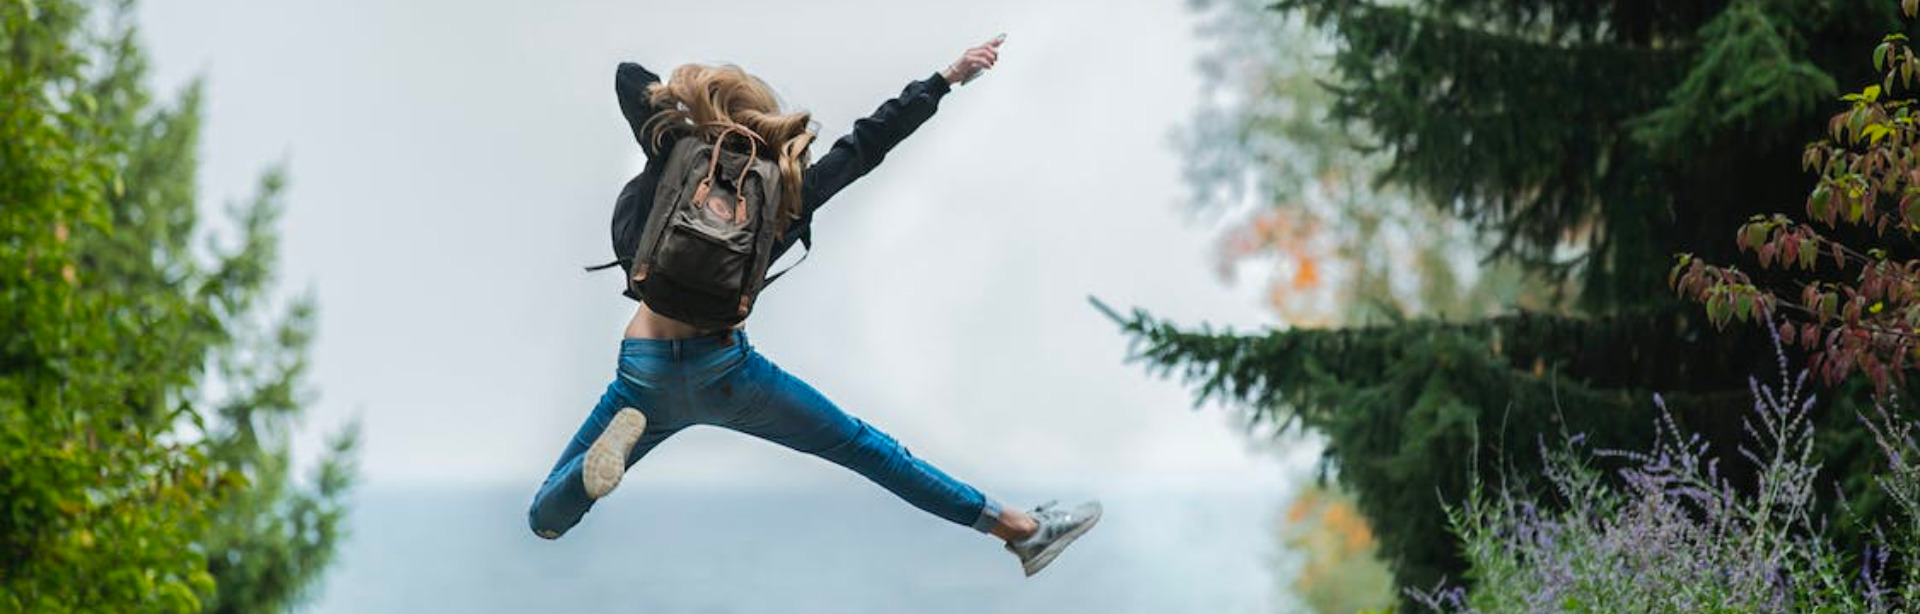 woman jumping into the air with backpack